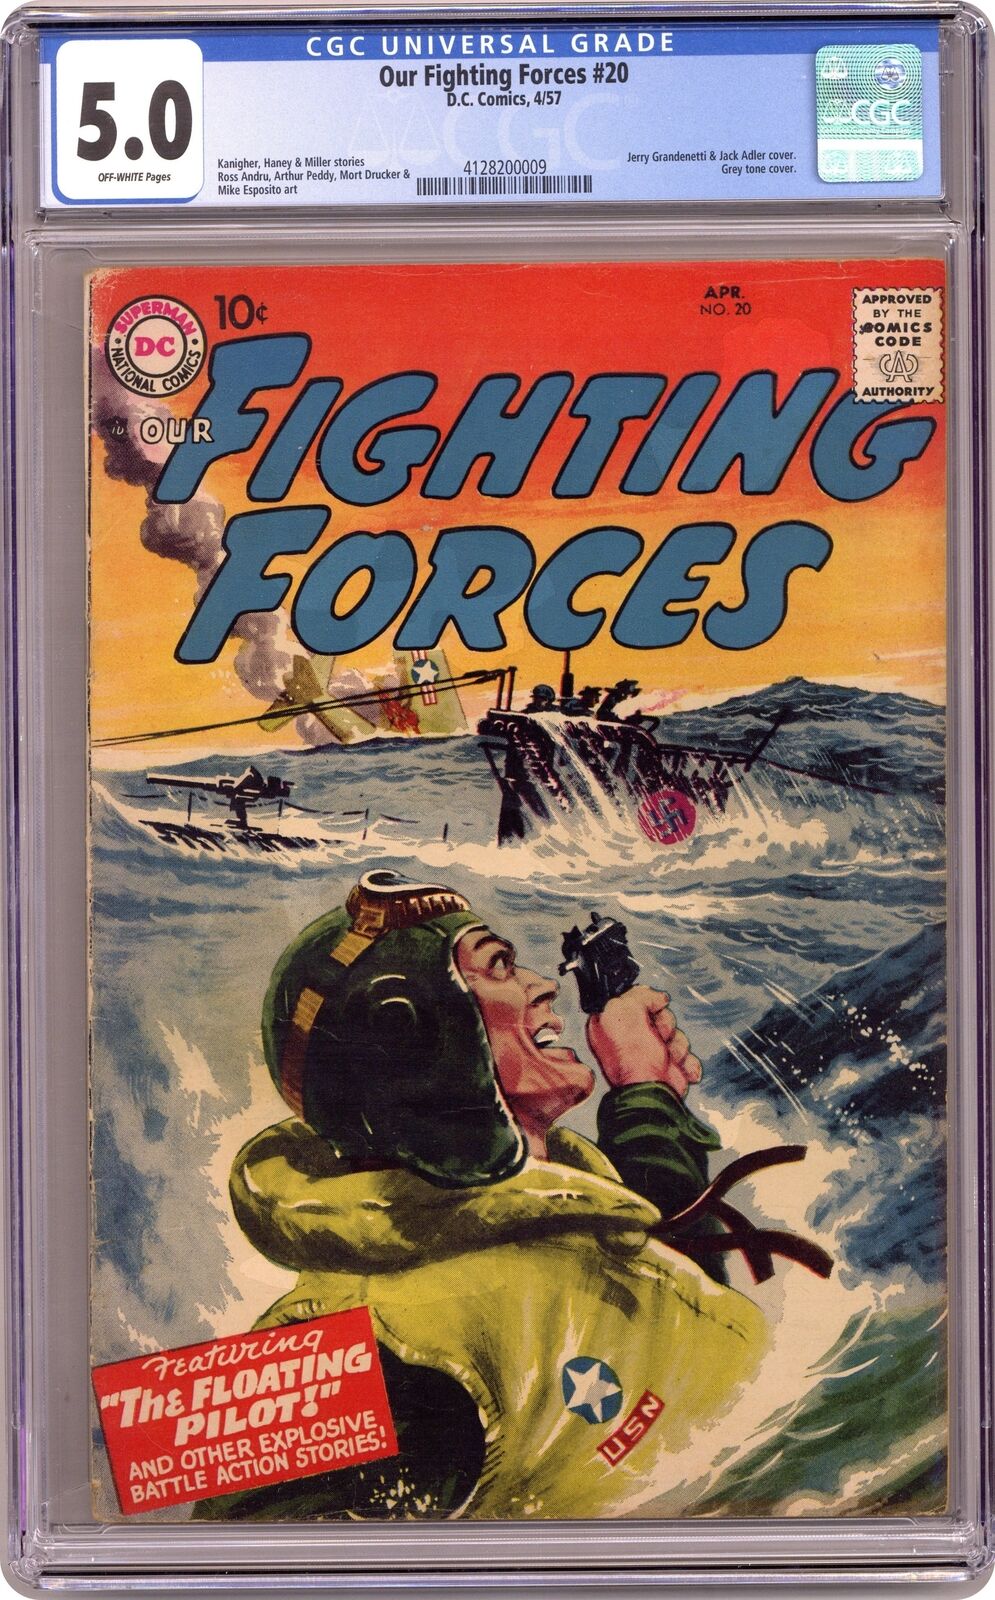 Our Fighting Forces #20 CGC 5.0 1957 4128200009